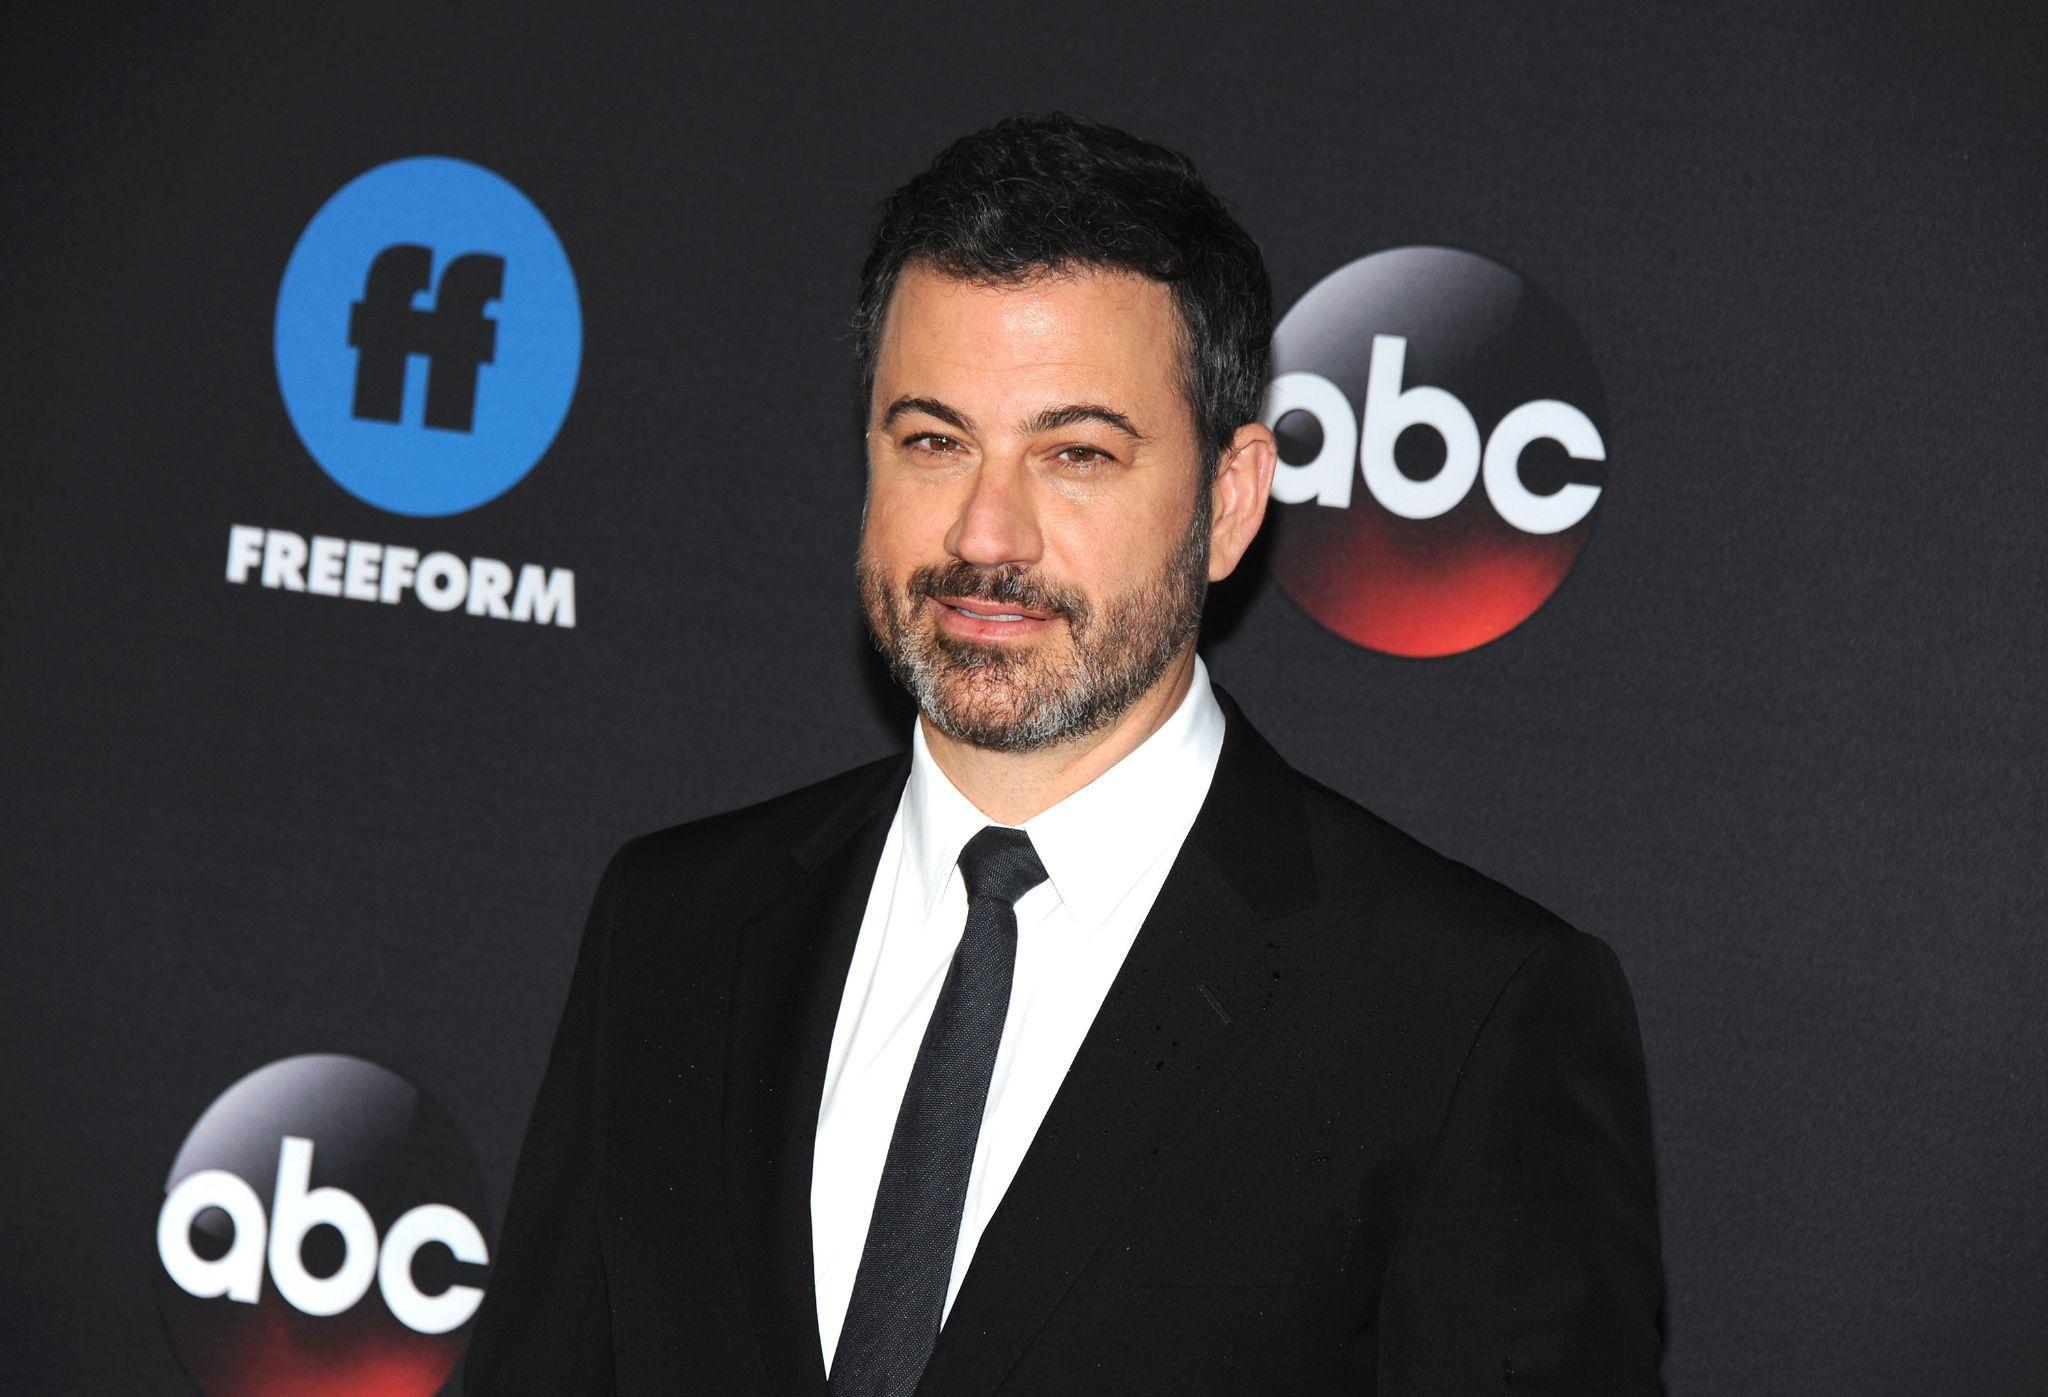 Jimmy Kimmel wears a suit and tie at the ABC Upfronts